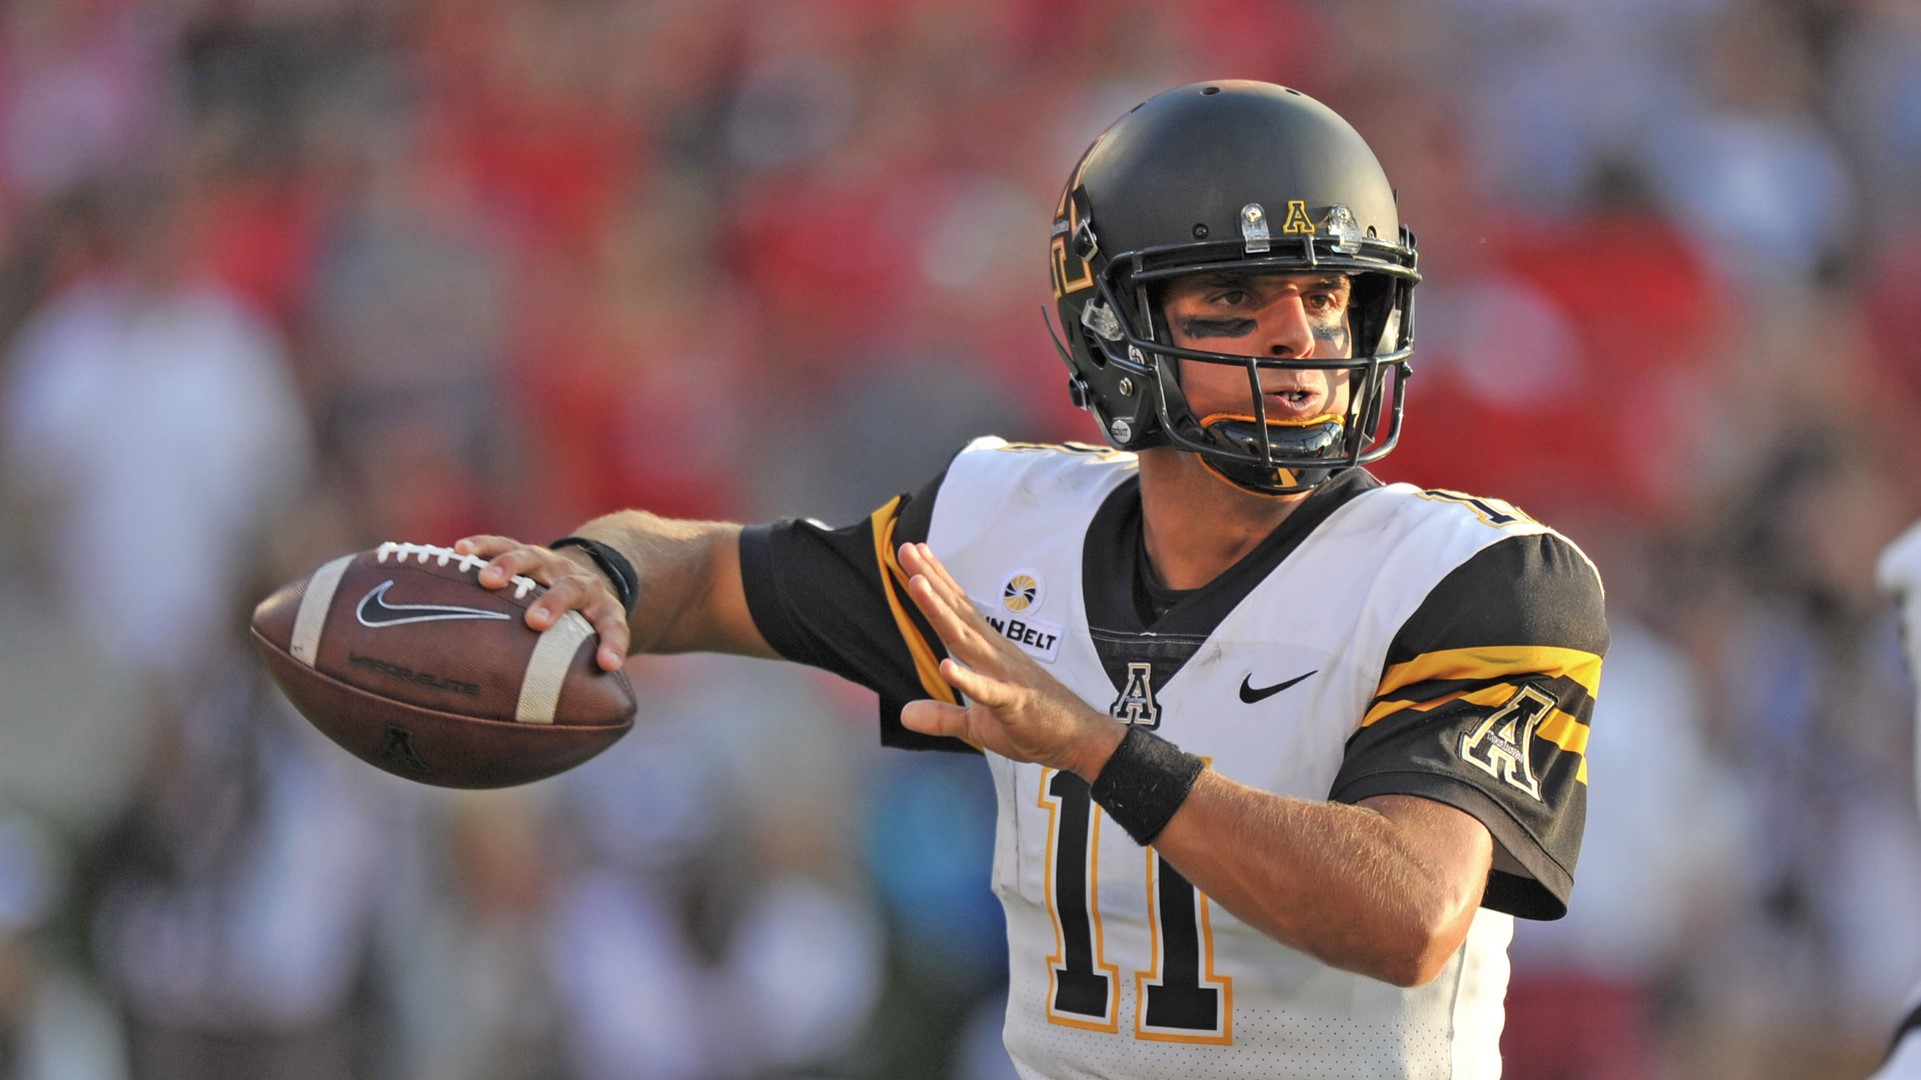 Little Things Cost Appalachian State In 31-10 Loss to Georgia